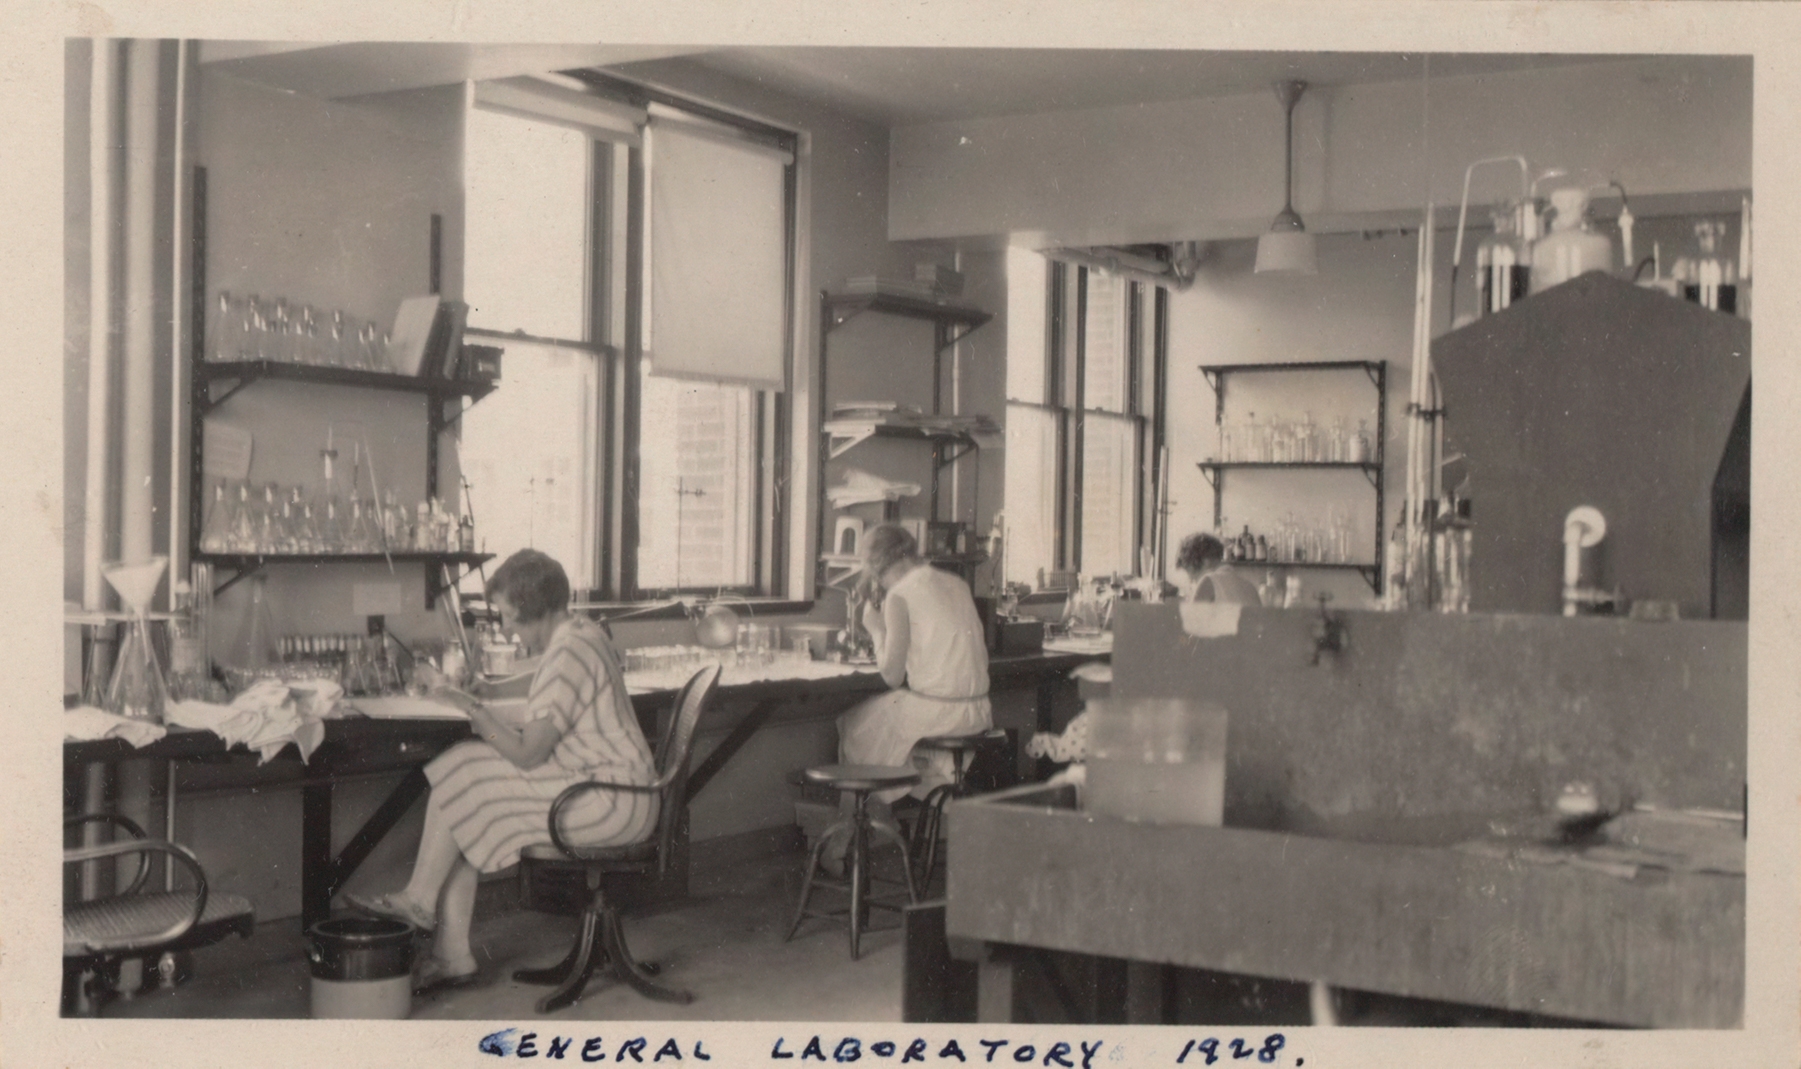 A black and white image of women working in the lab. Labeled General Laboratory 1928